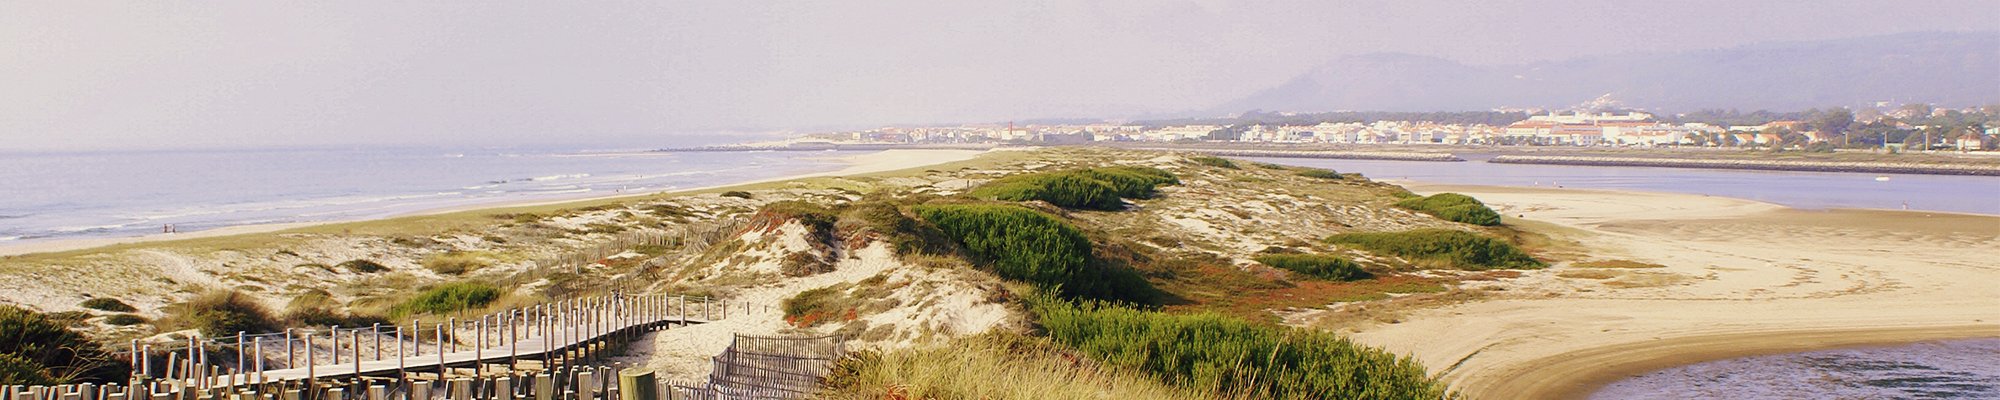 THE NORTHERN LITORAL NATURAL PARK